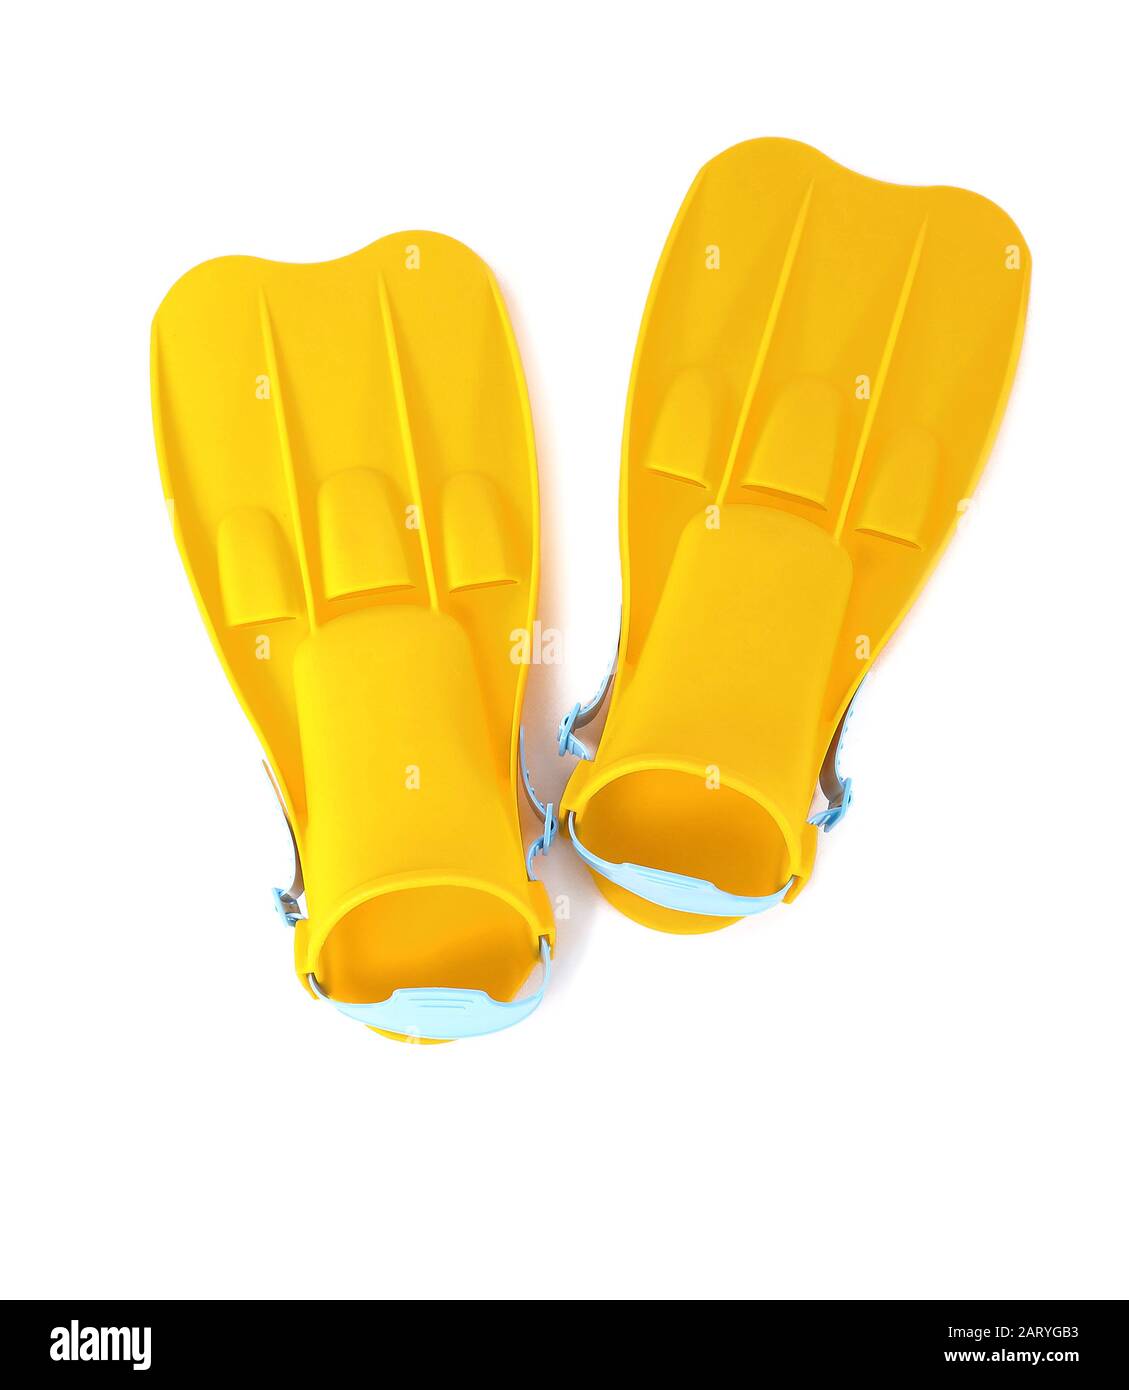 Snorkeling flippers on white background Stock Photo